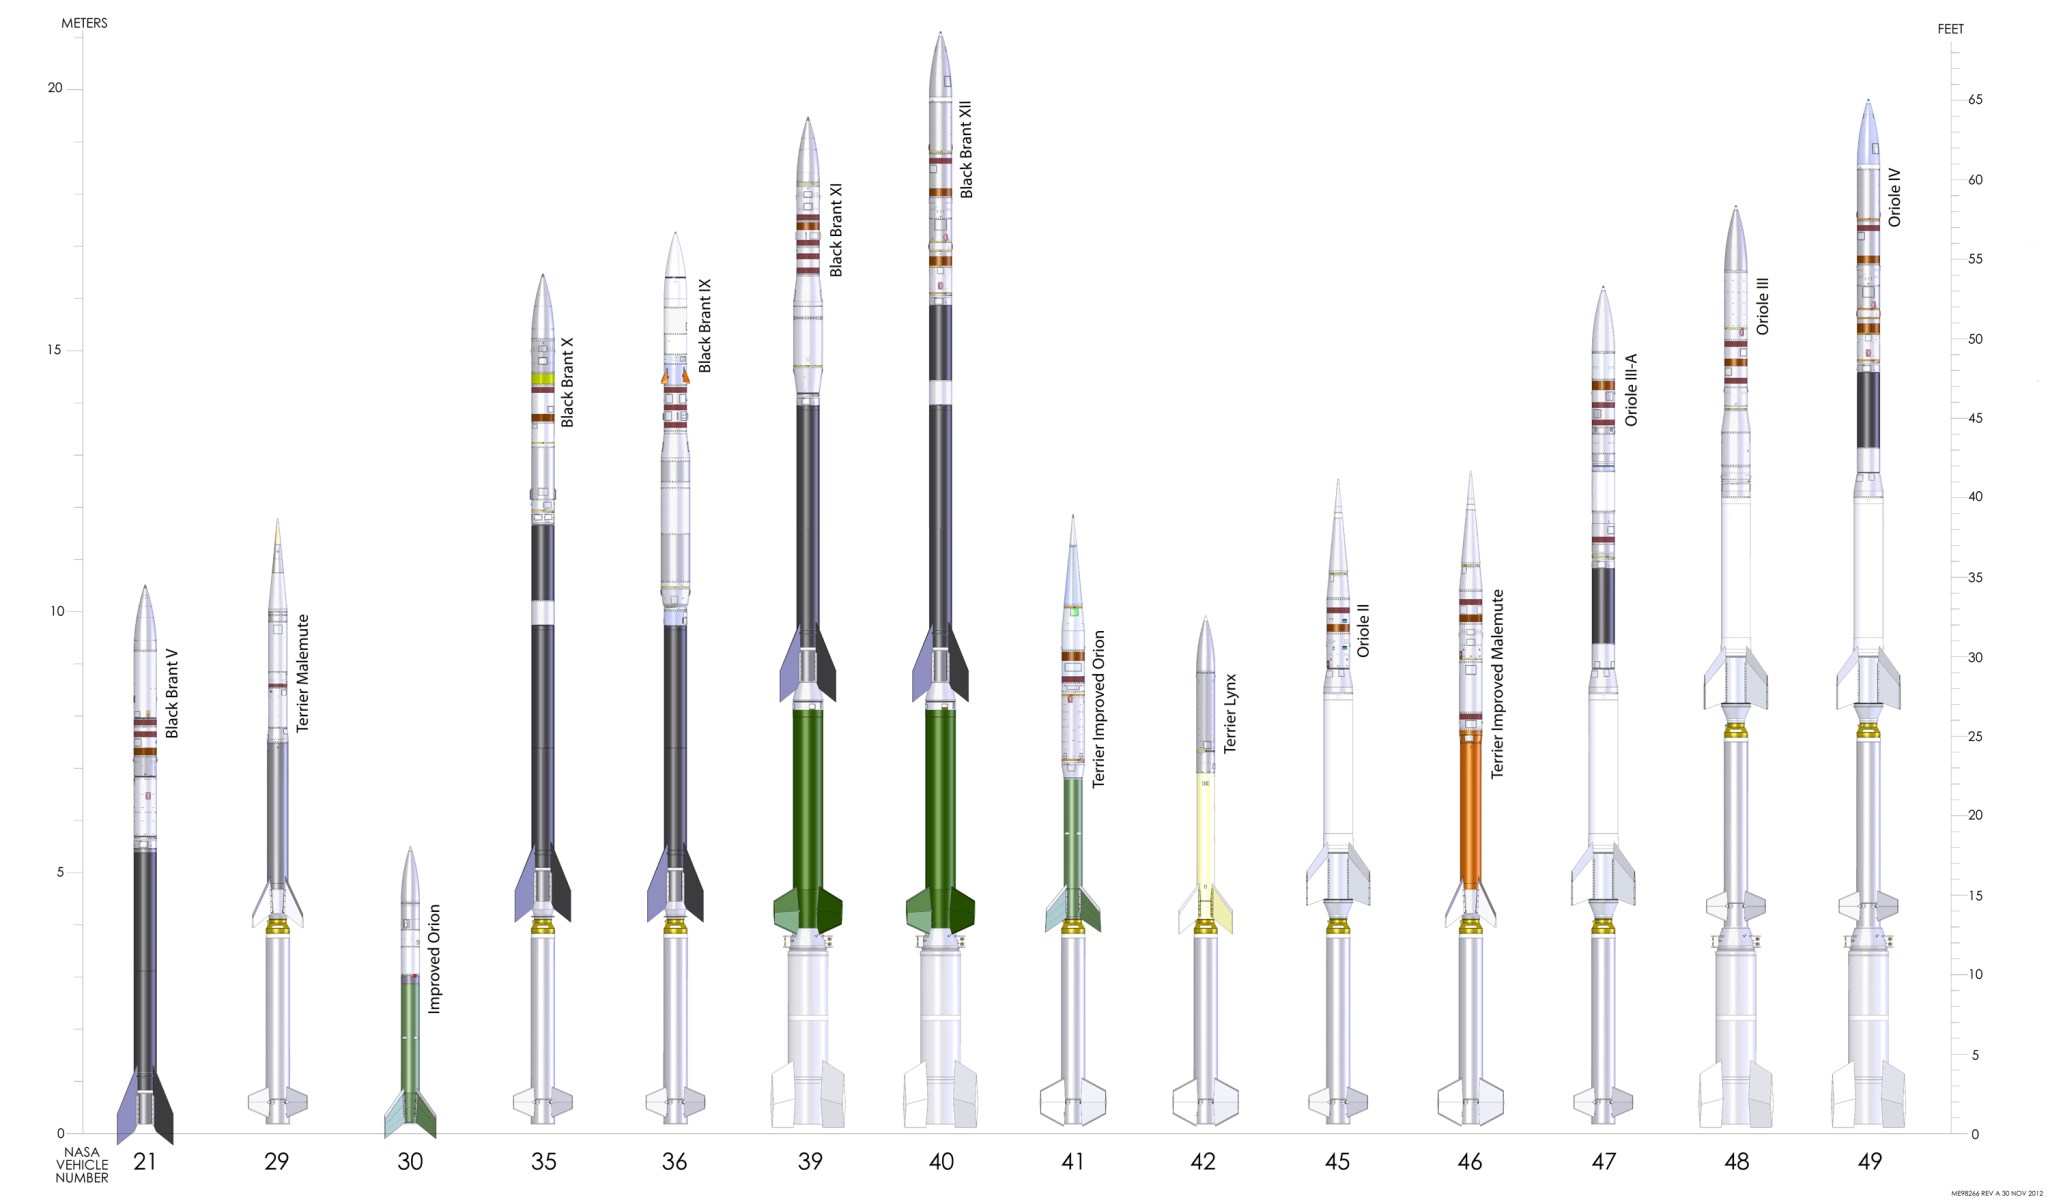 An illustration of multiple sounding rocket types. There are 14 different types of configurations shown, with the smallest on the left to the largest on the right.